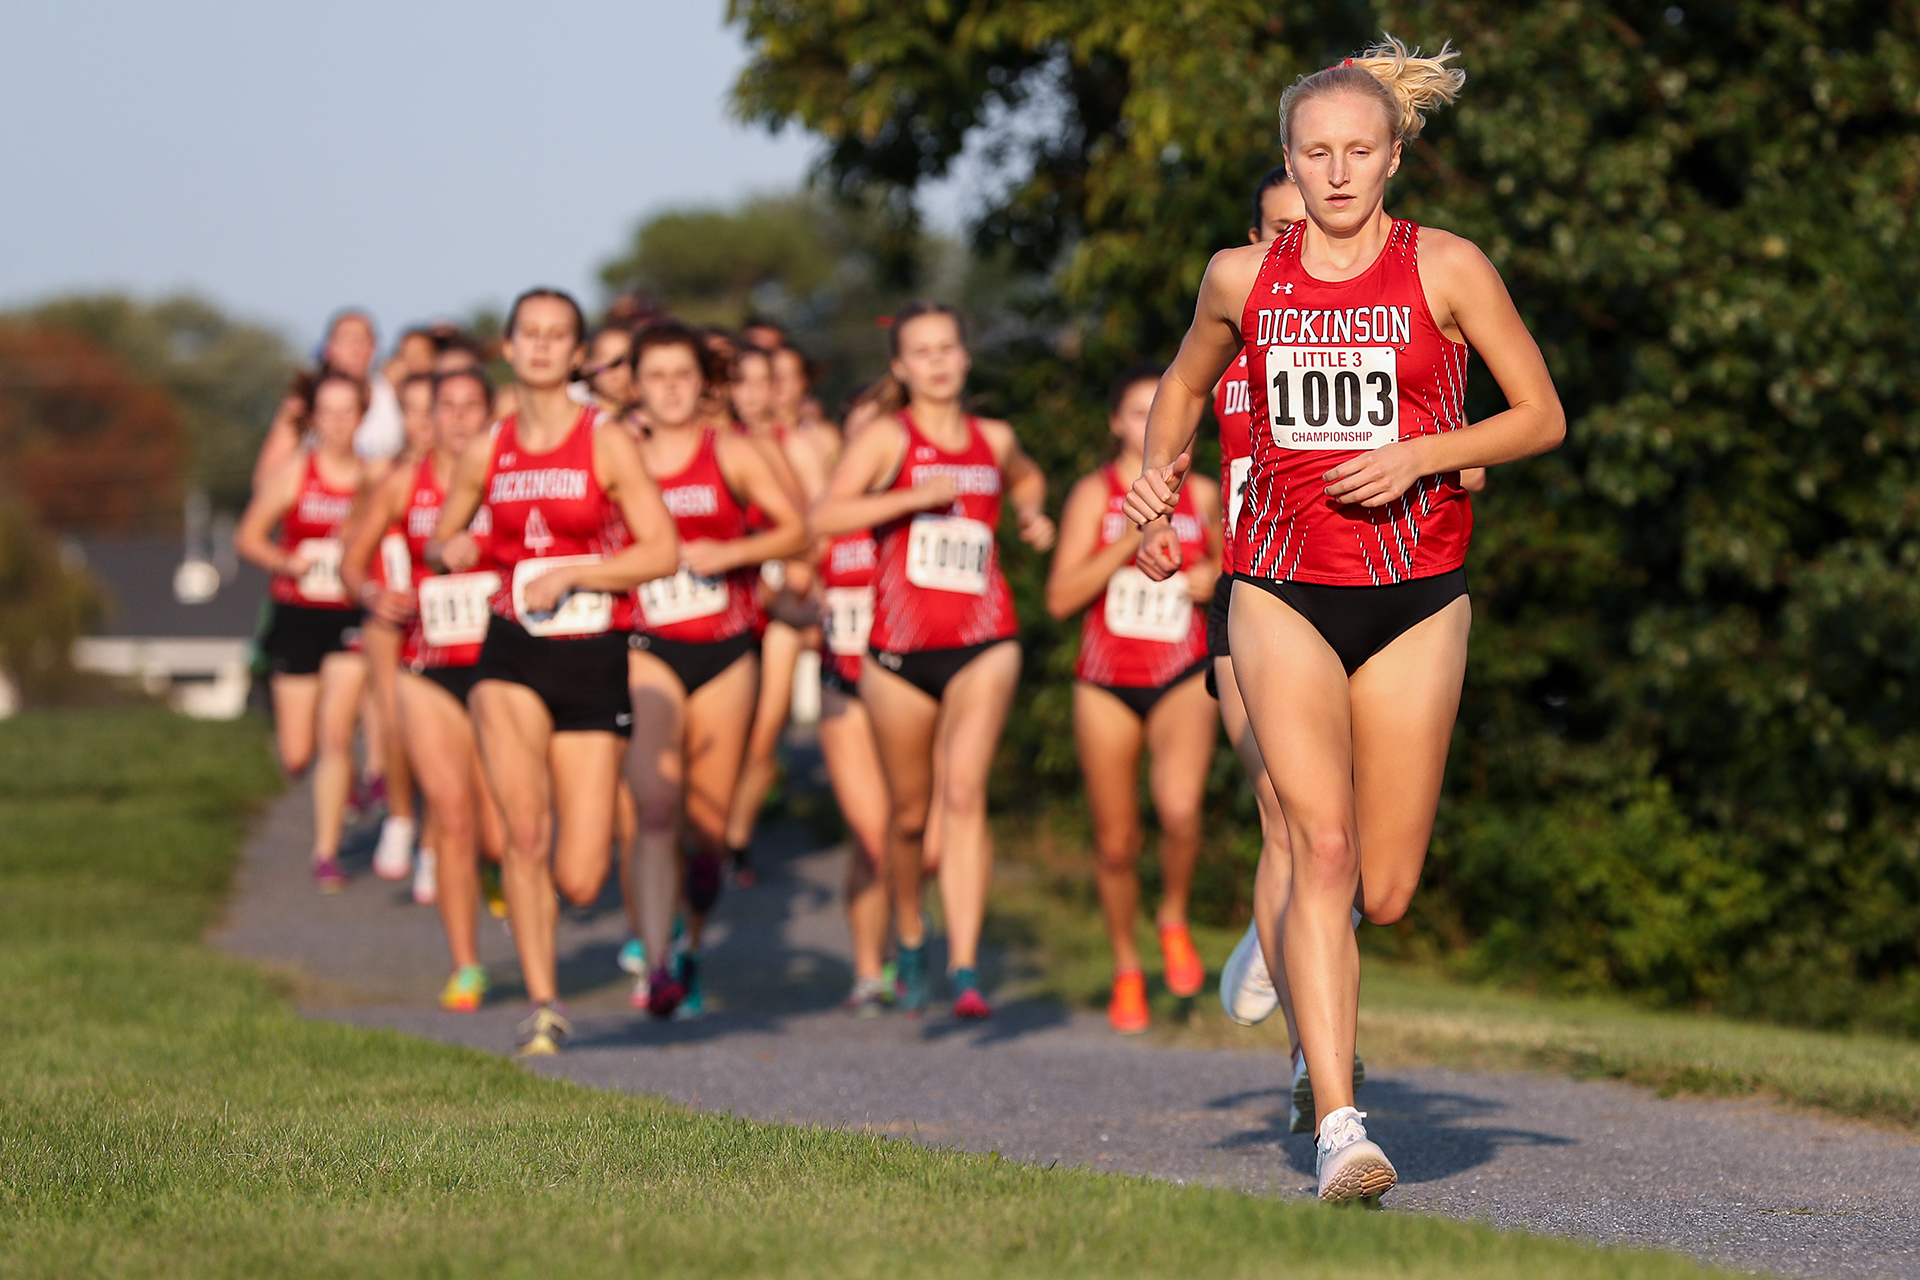 Dickinson women's cross country team in action 